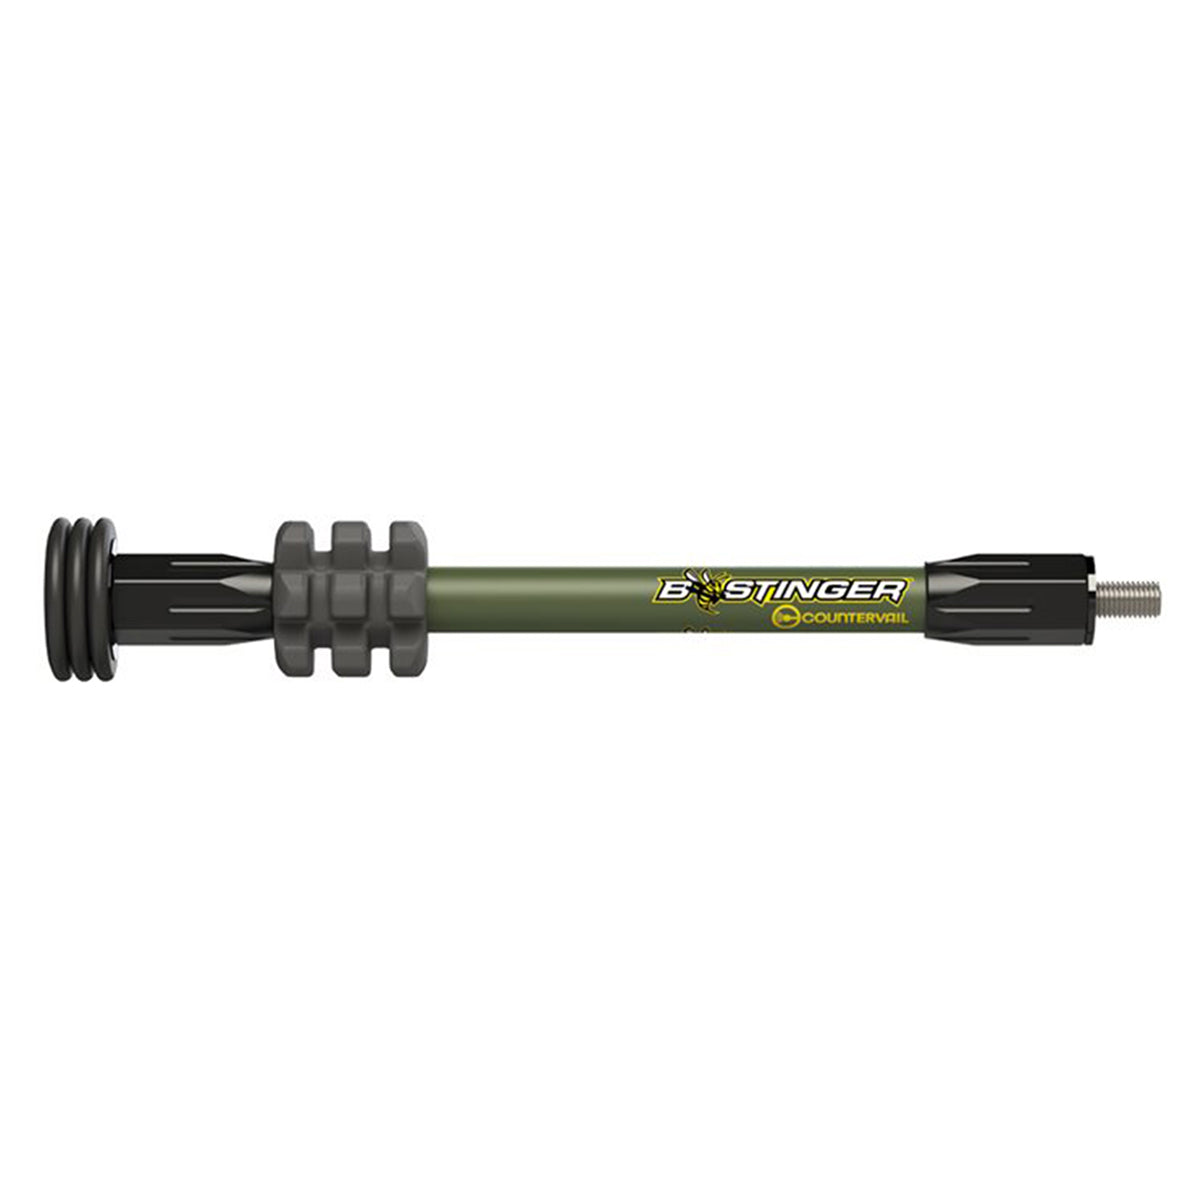 Bee Stinger MicroHex Stabilizer in Bee Stinger MicroHex Stabilizer by Bee Stinger | Archery - goHUNT Shop by GOHUNT | Bee Stinger - GOHUNT Shop